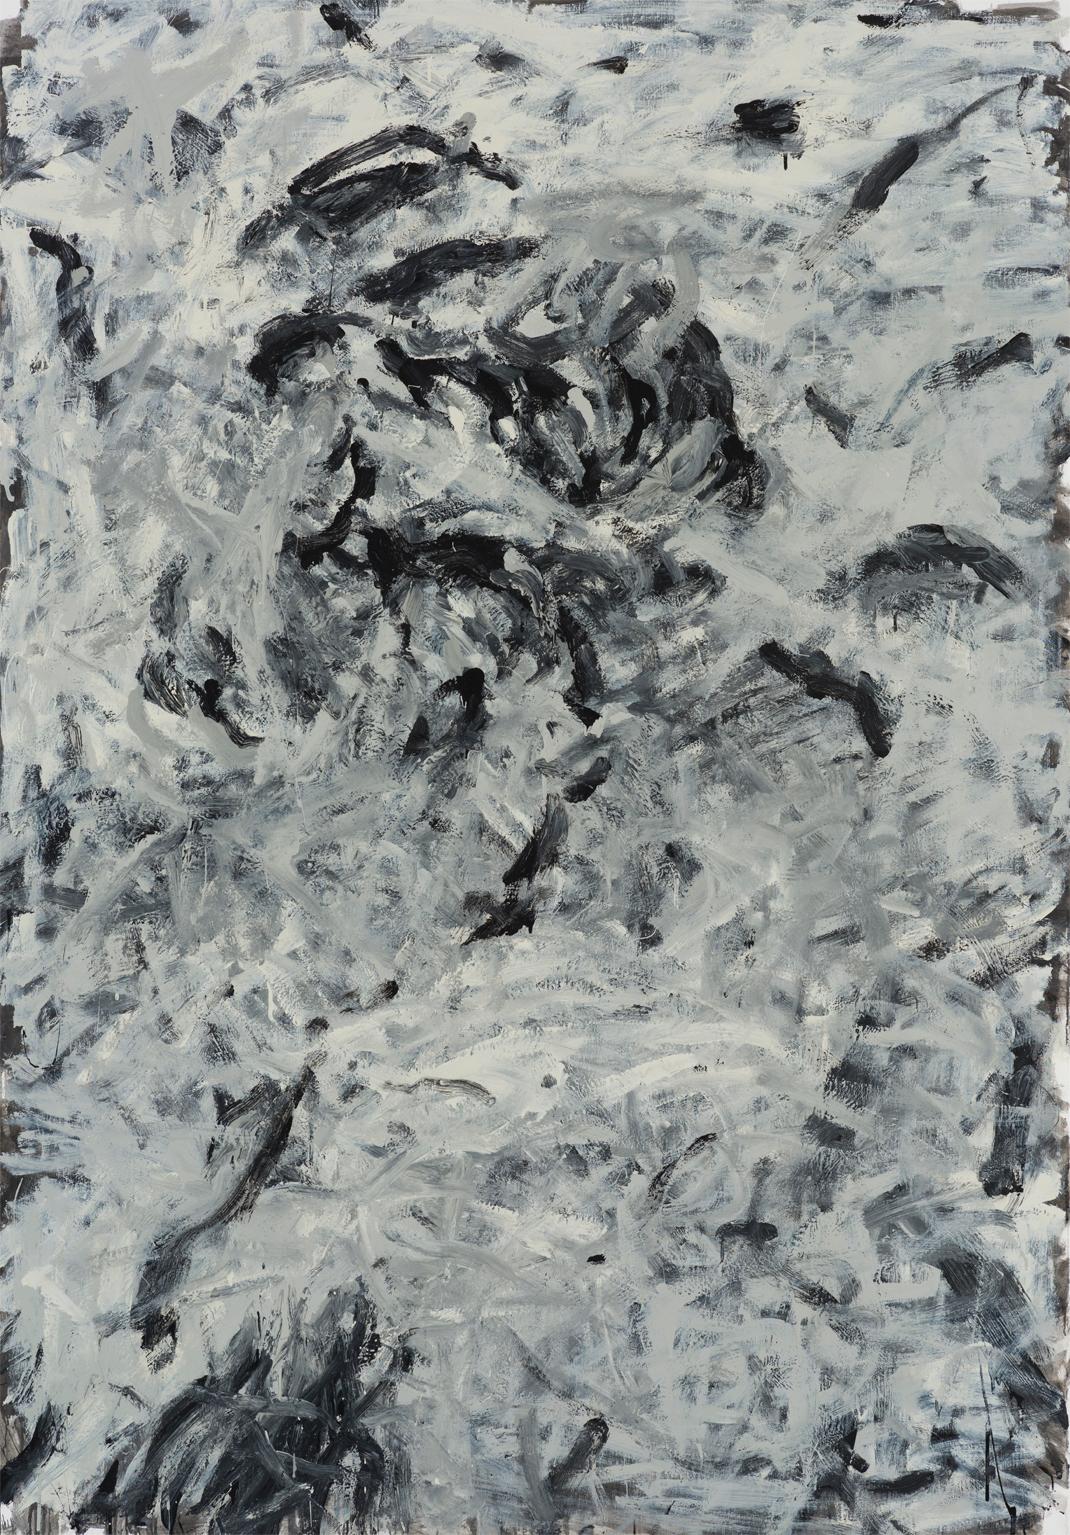 Untitled 08 [Remains of the Remains 08], 2018 - 2019
oil on canvas
78 47/64 H x 55 1/8 W in
200 H x 140 W cm

The large-sized paintings, signed by Zsolt Berszán, addresses the subject of death in terms of the remains of decaying bodies. The surface